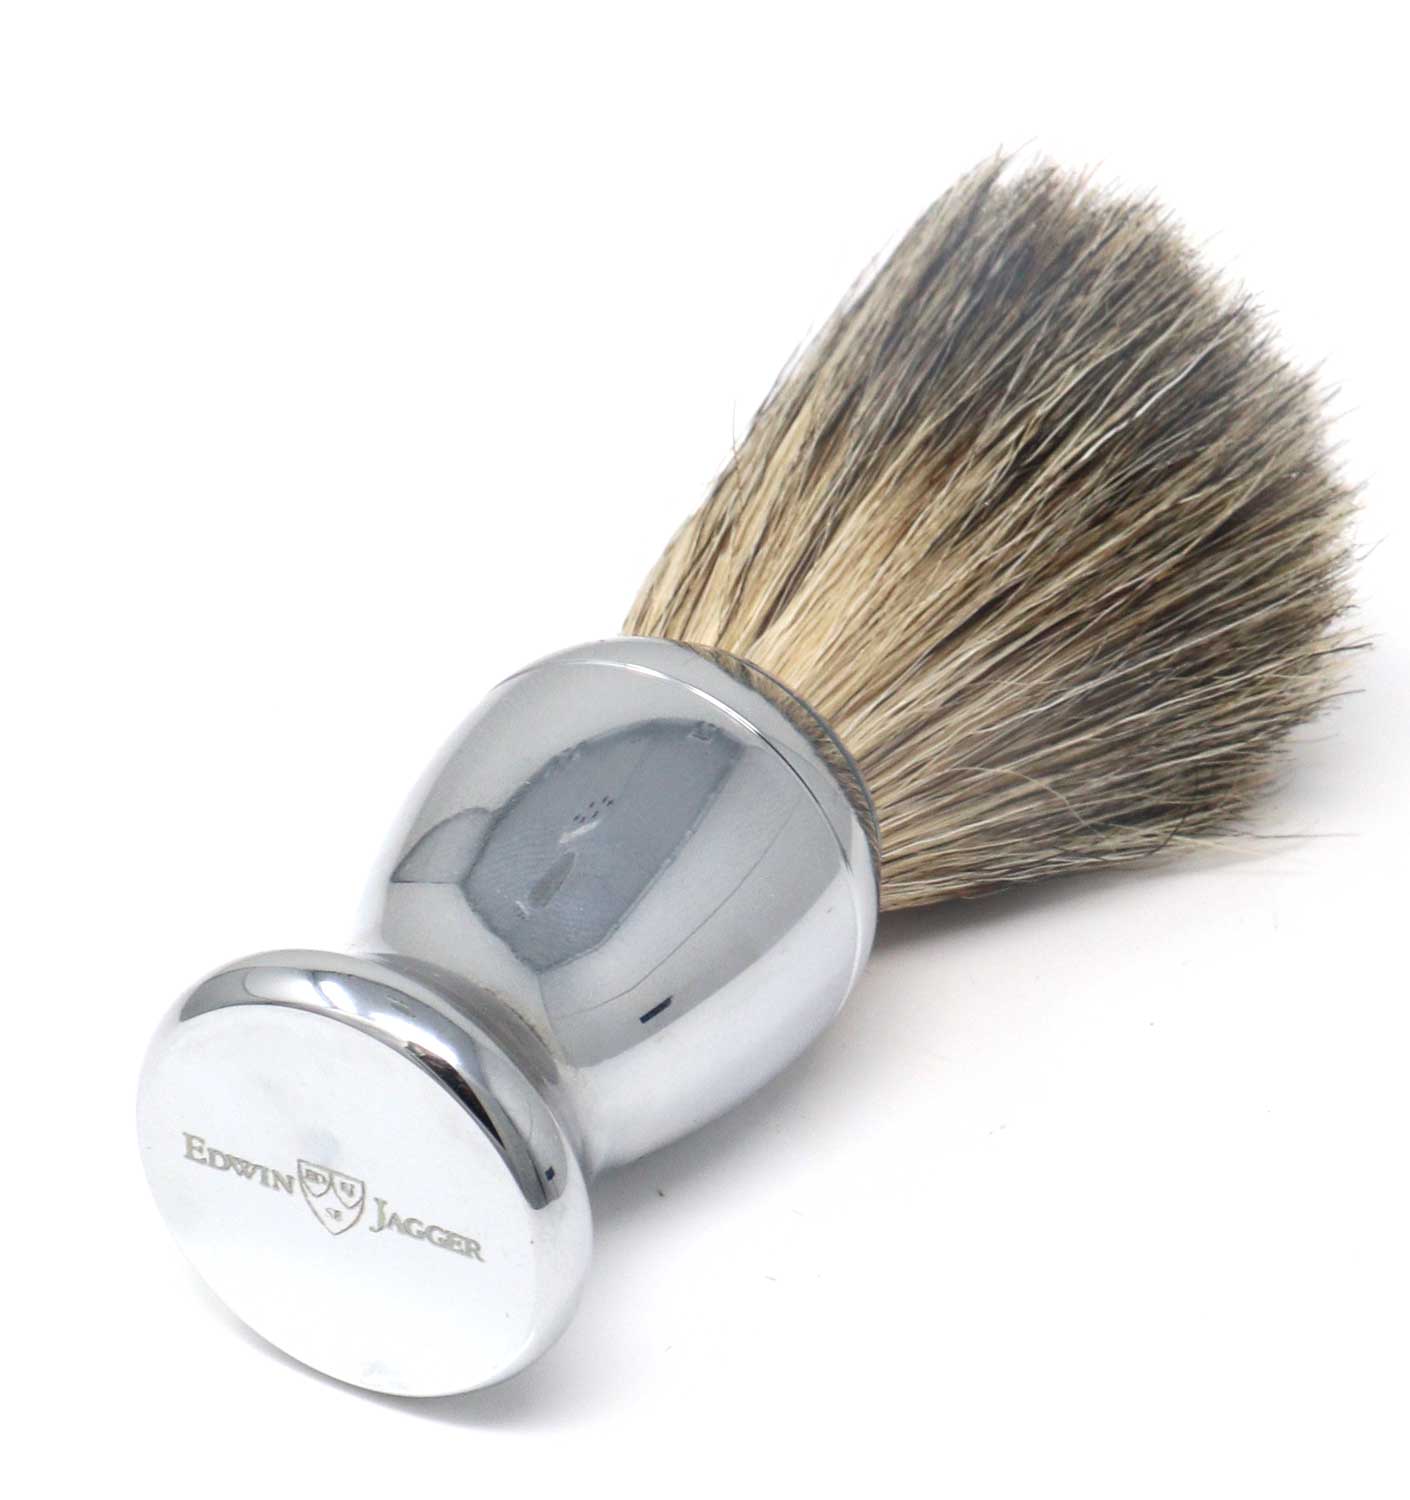 Load image into Gallery viewer, Edwin Jagger Chrome Plated Shaving Brush With Badger Fill
